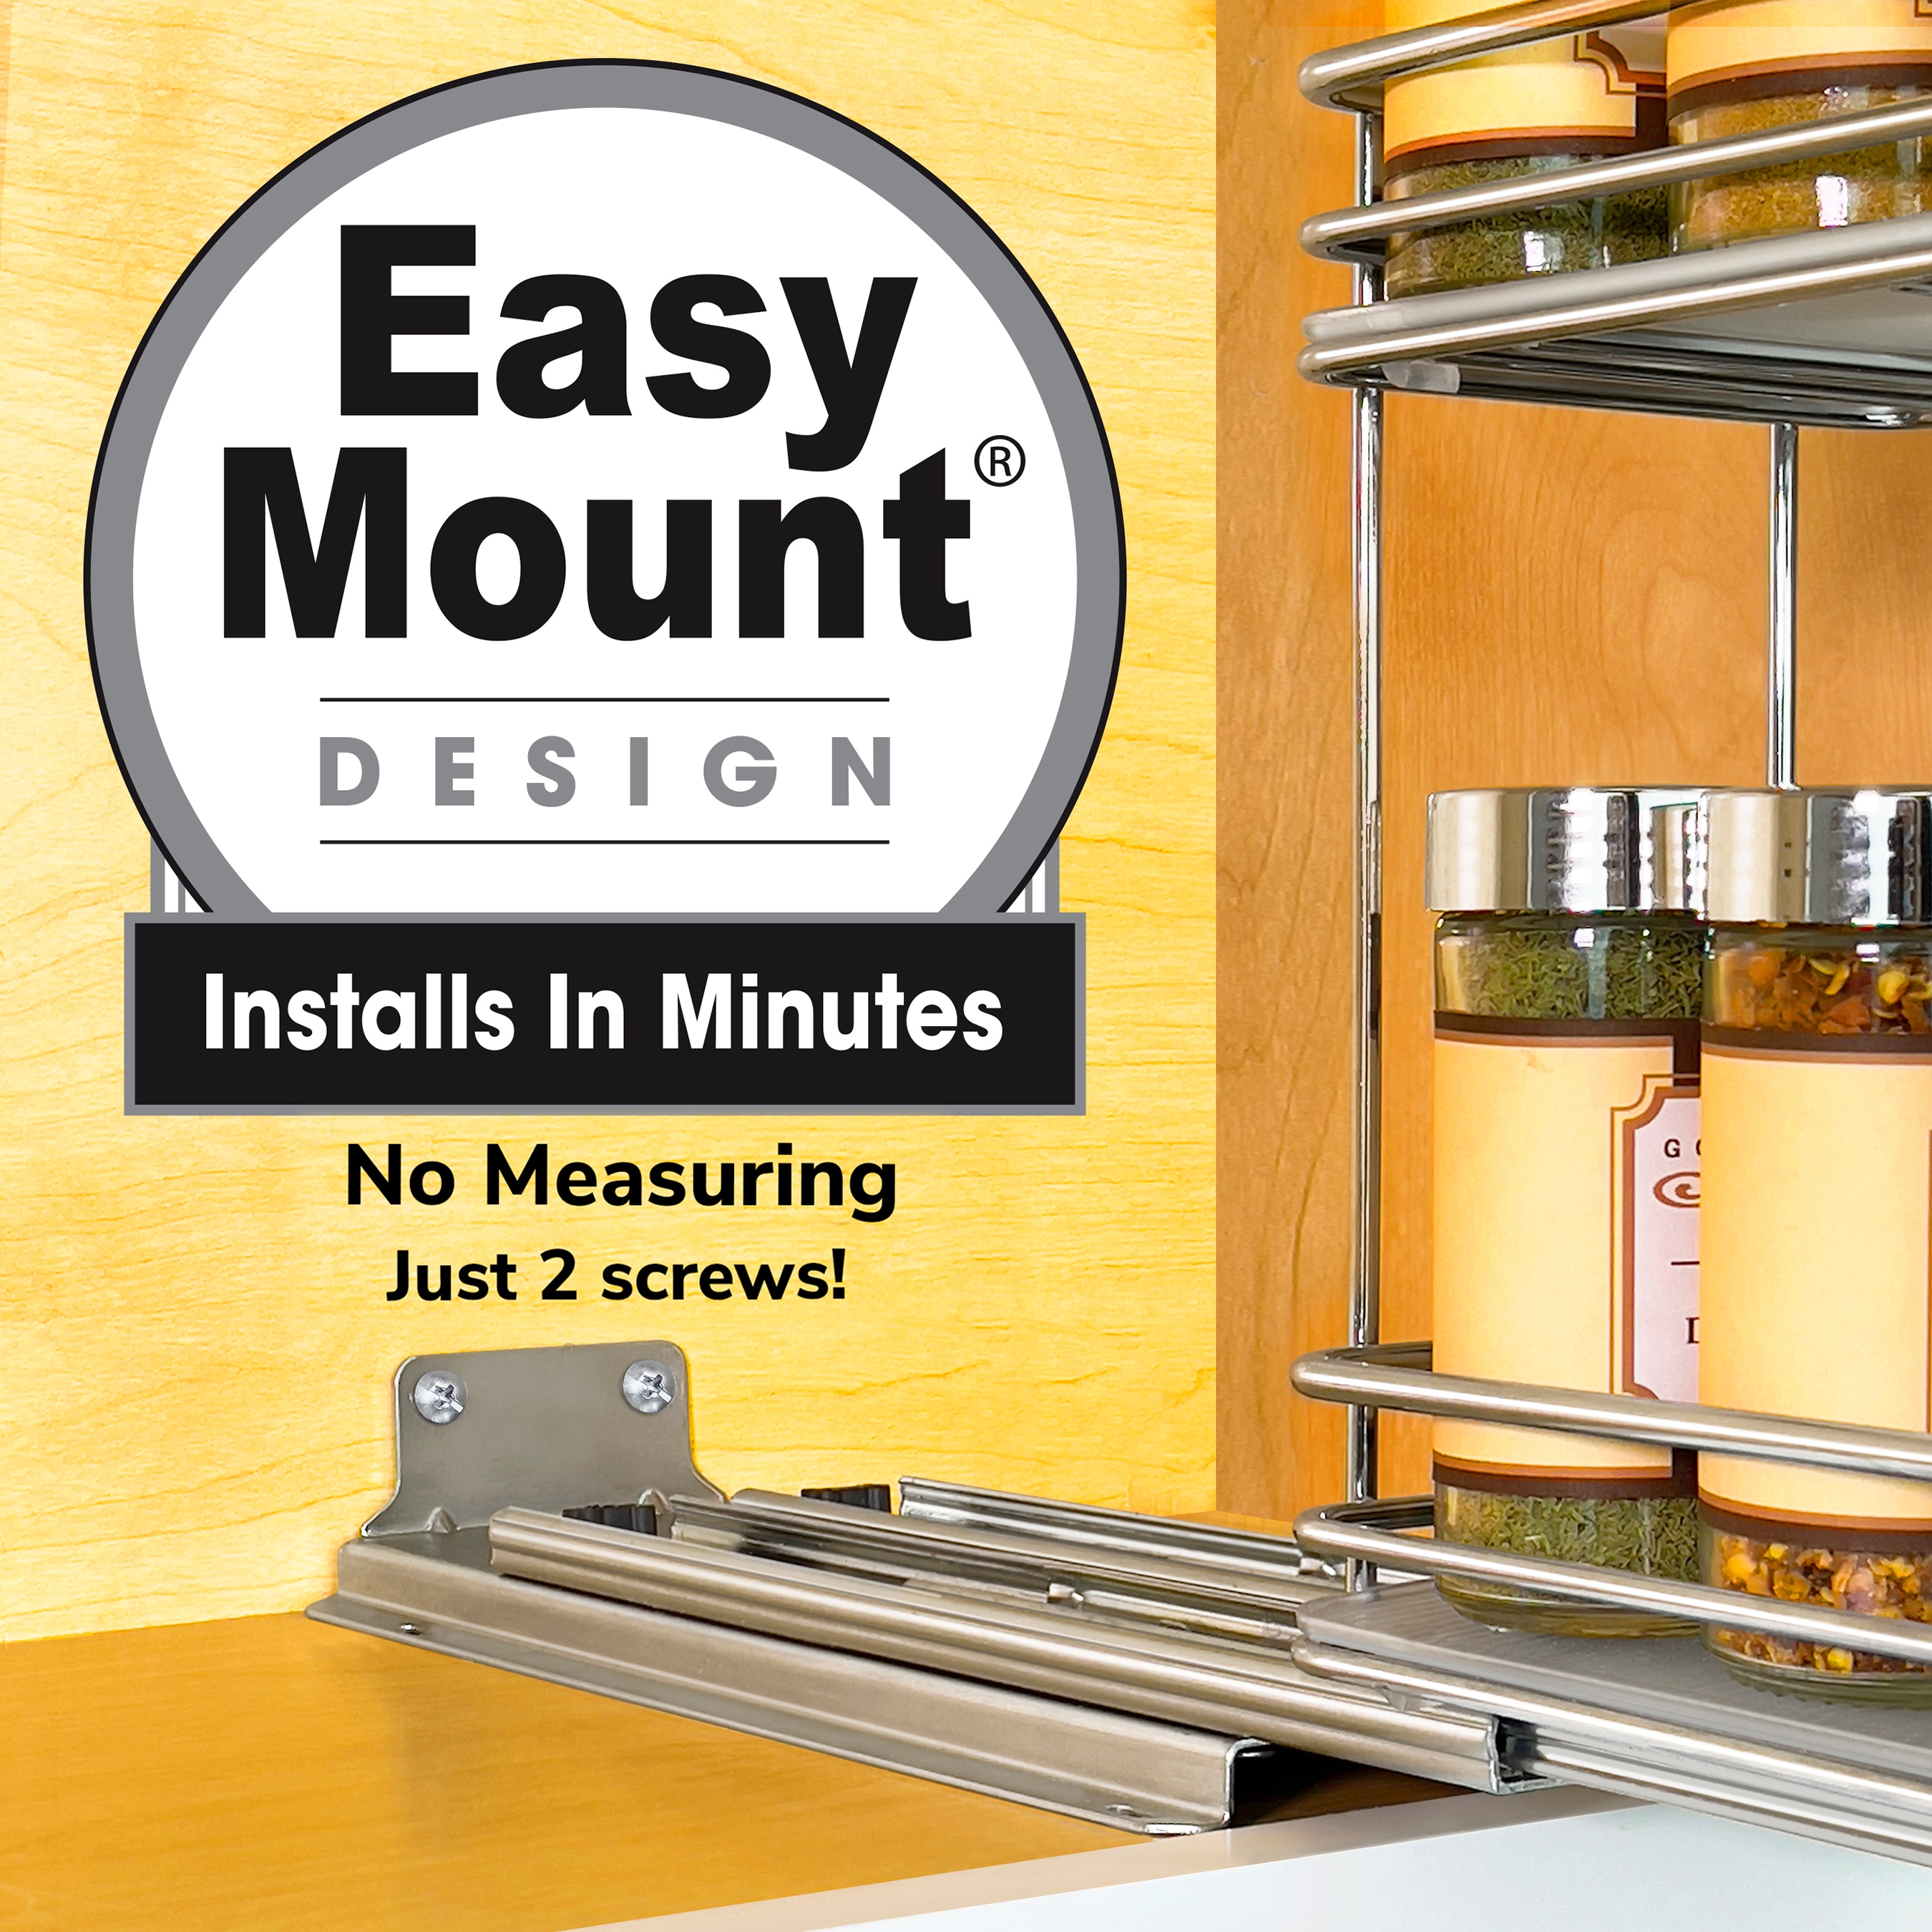 Diamond at Lowes - Organization - Pull Down Spice Rack